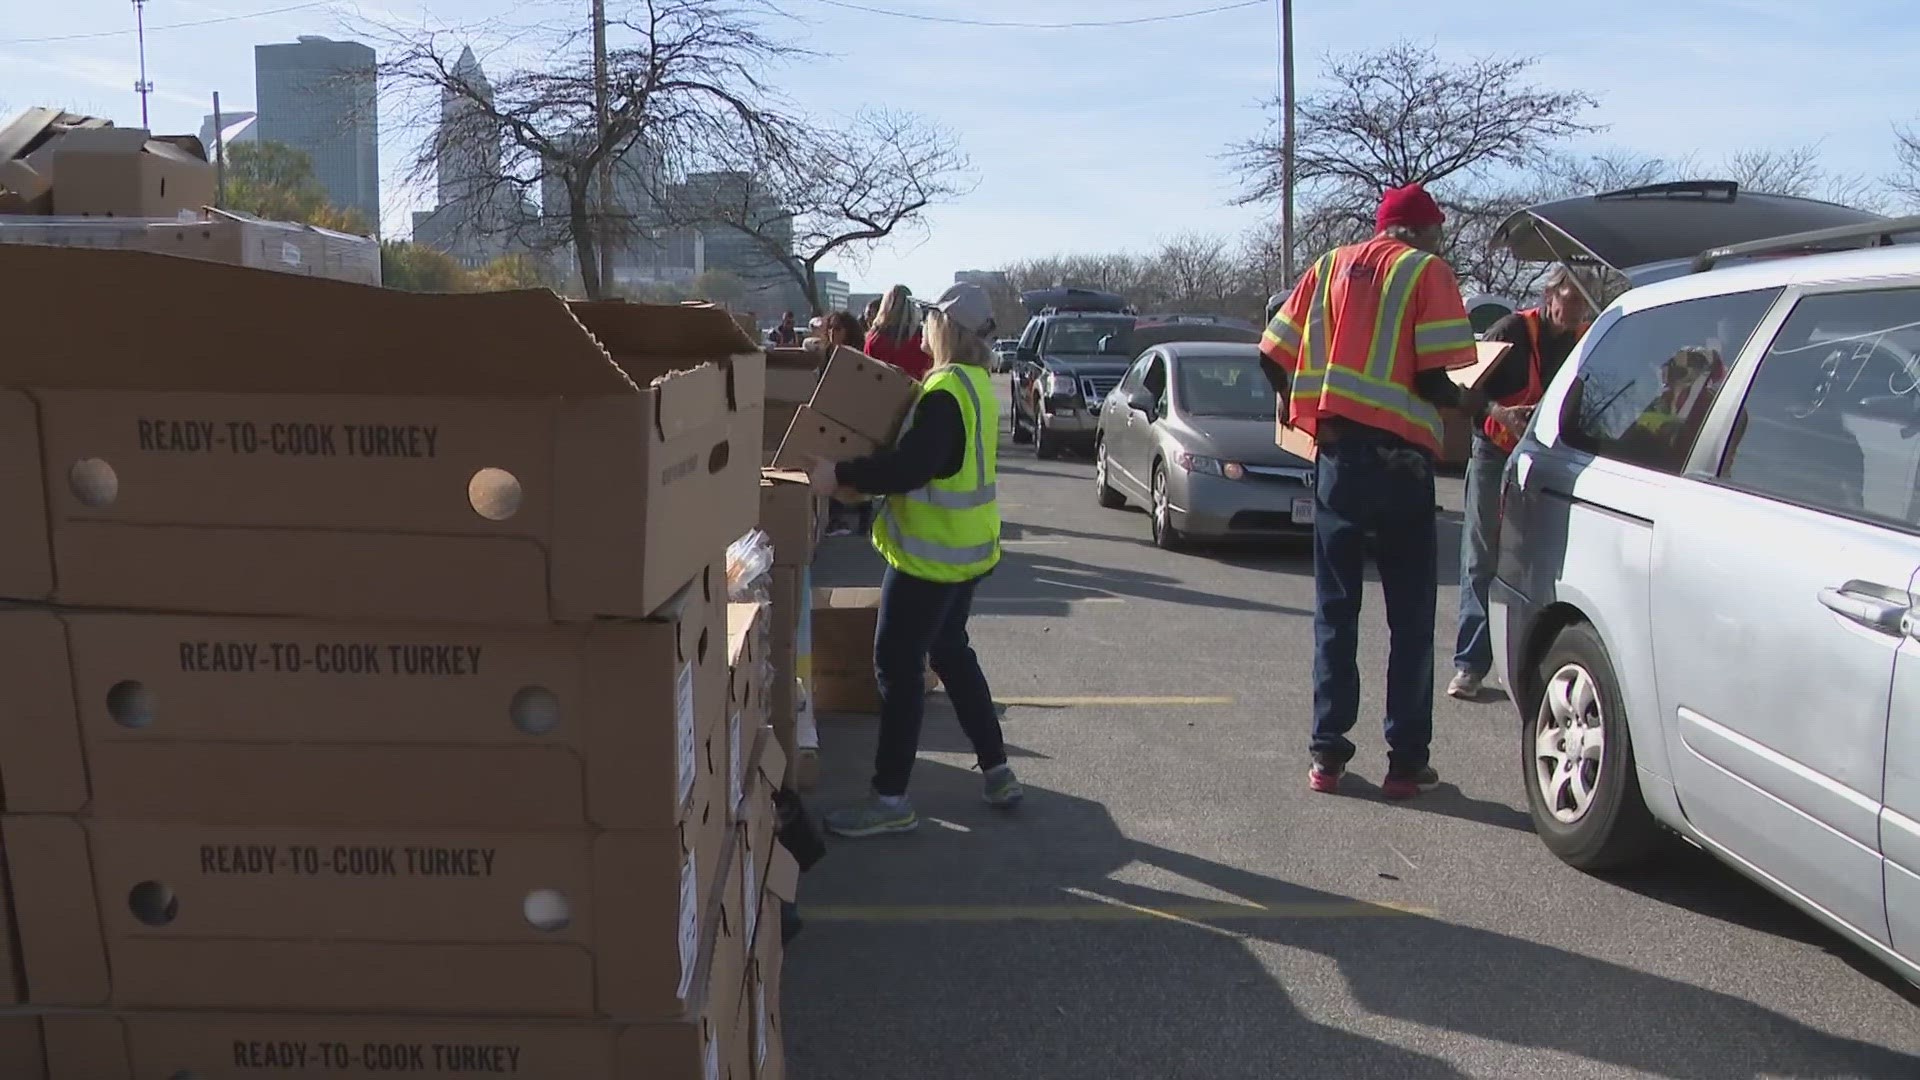 The Greater Cleveland Food Bank’s food distribution provided ingredients for Thanksgiving meals on Thursday at the Muni lot.